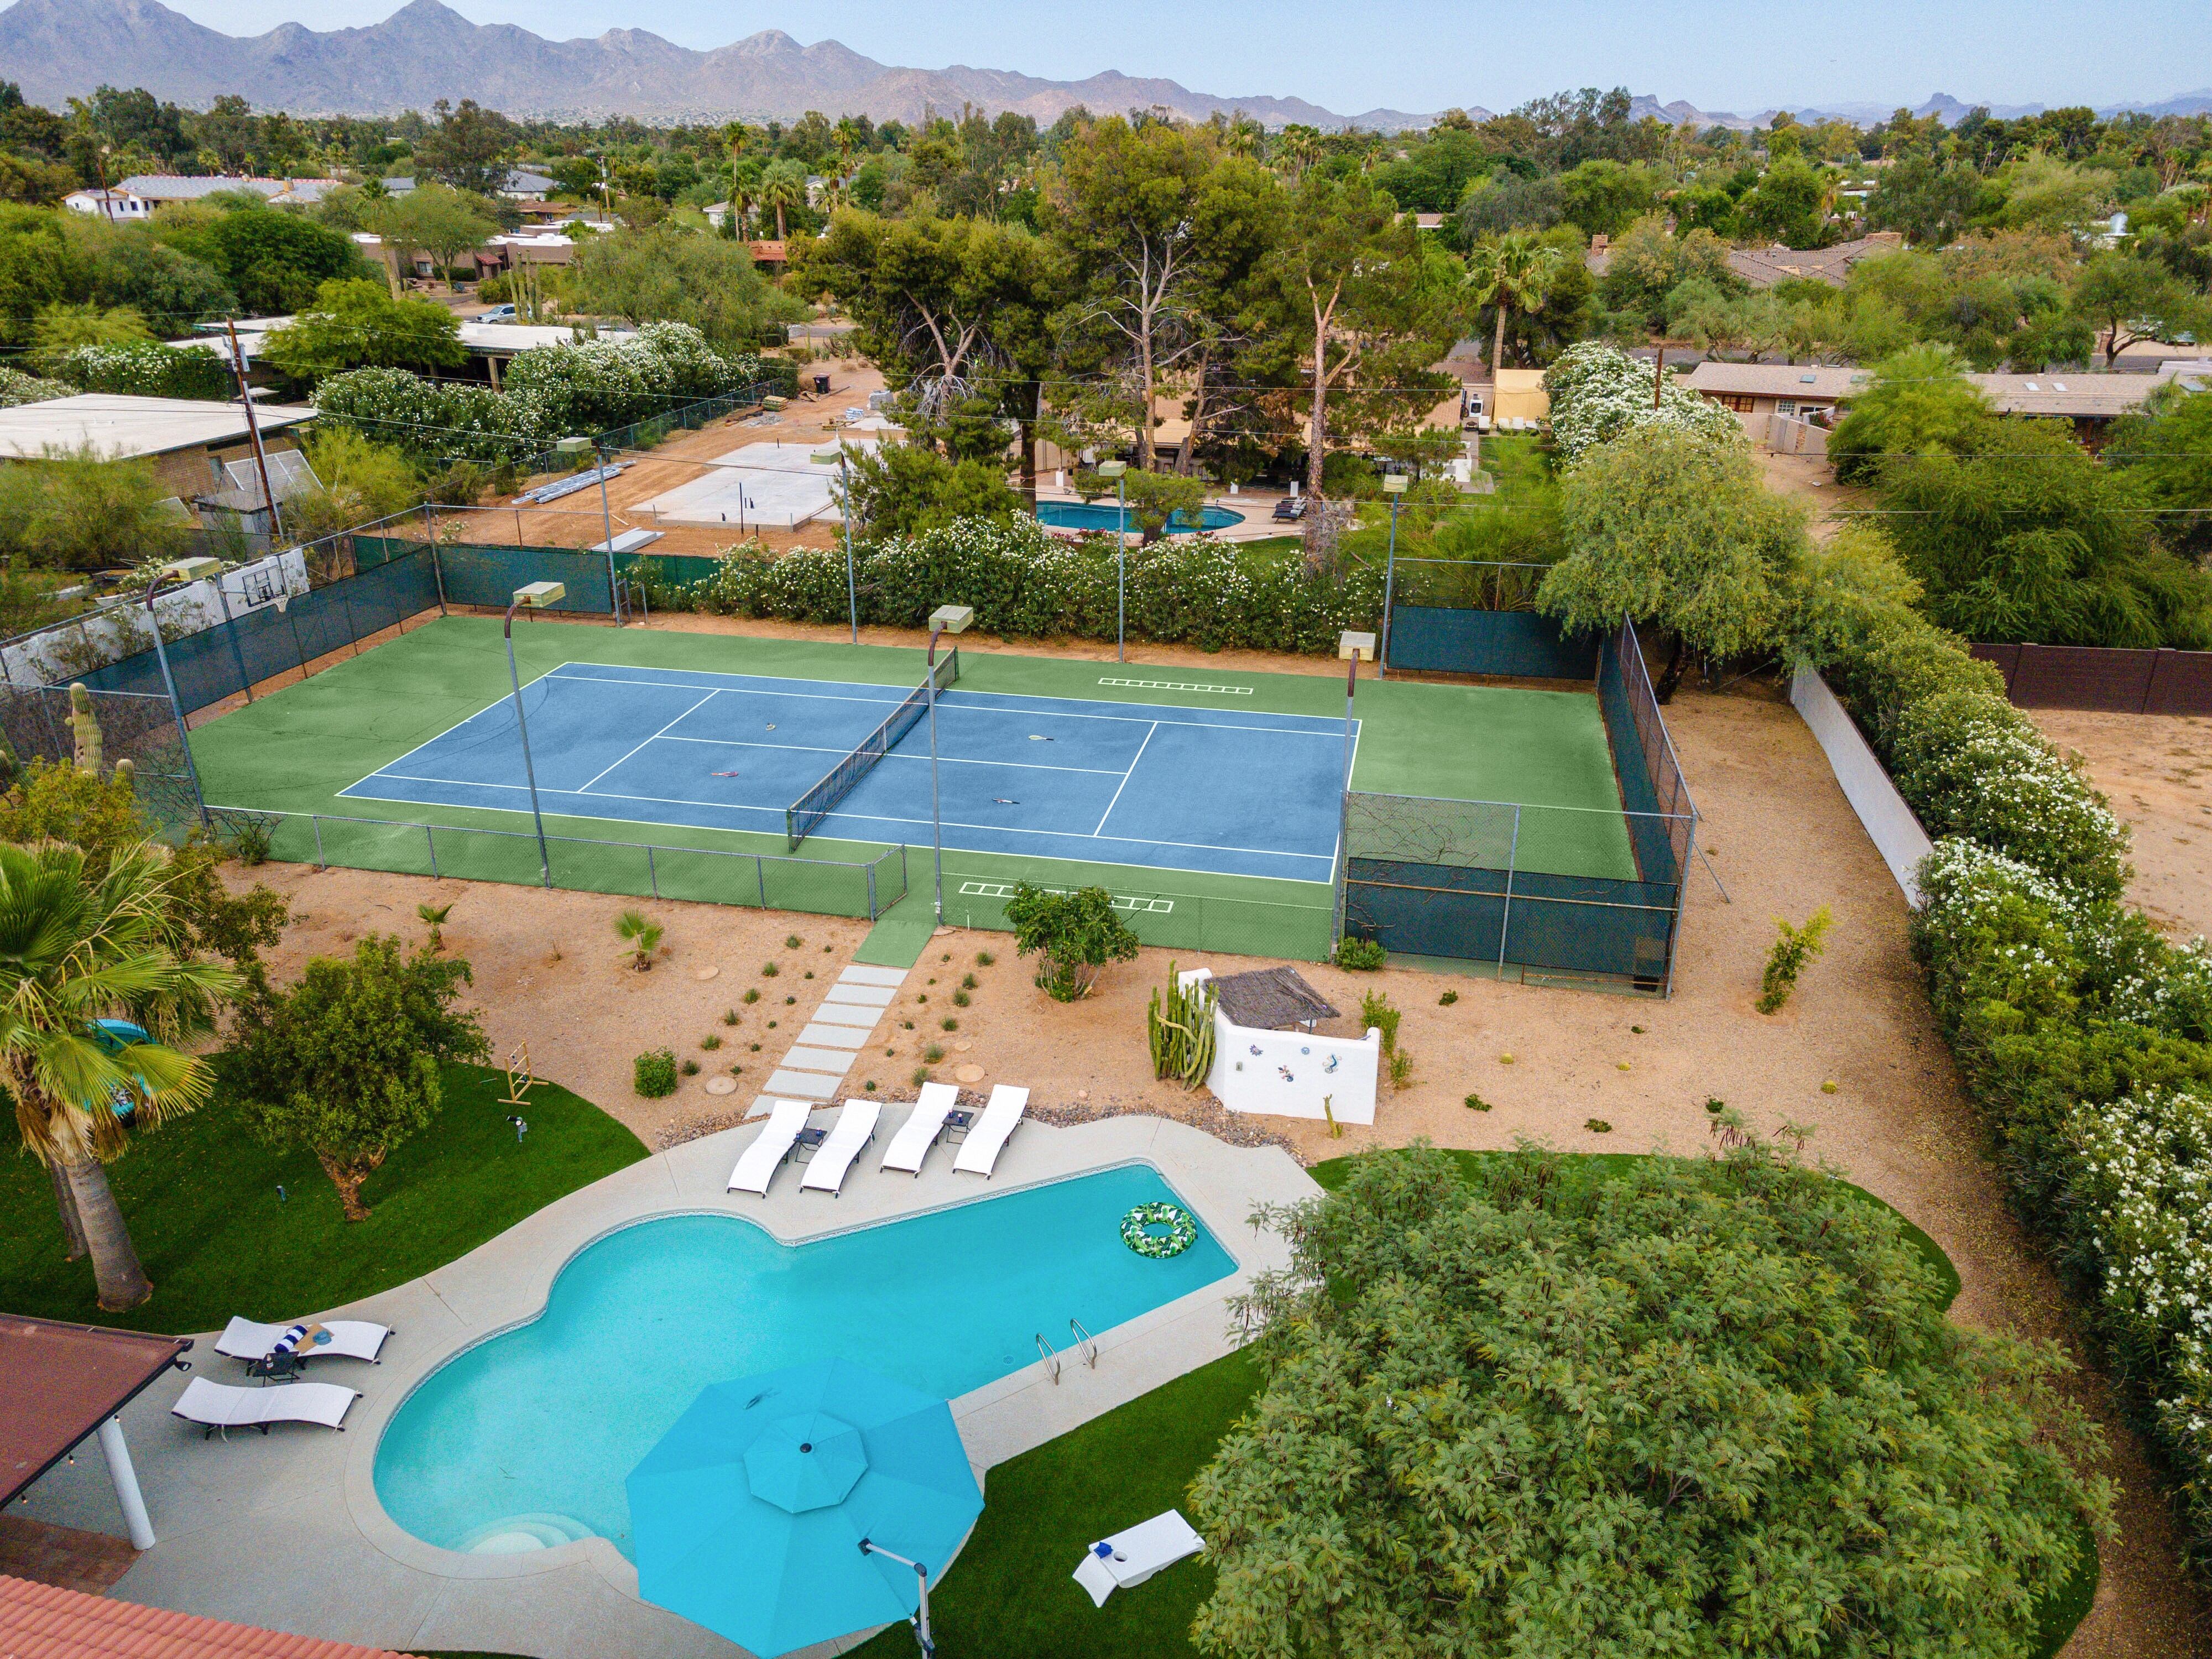 Enjoy a private pool and sports courts!